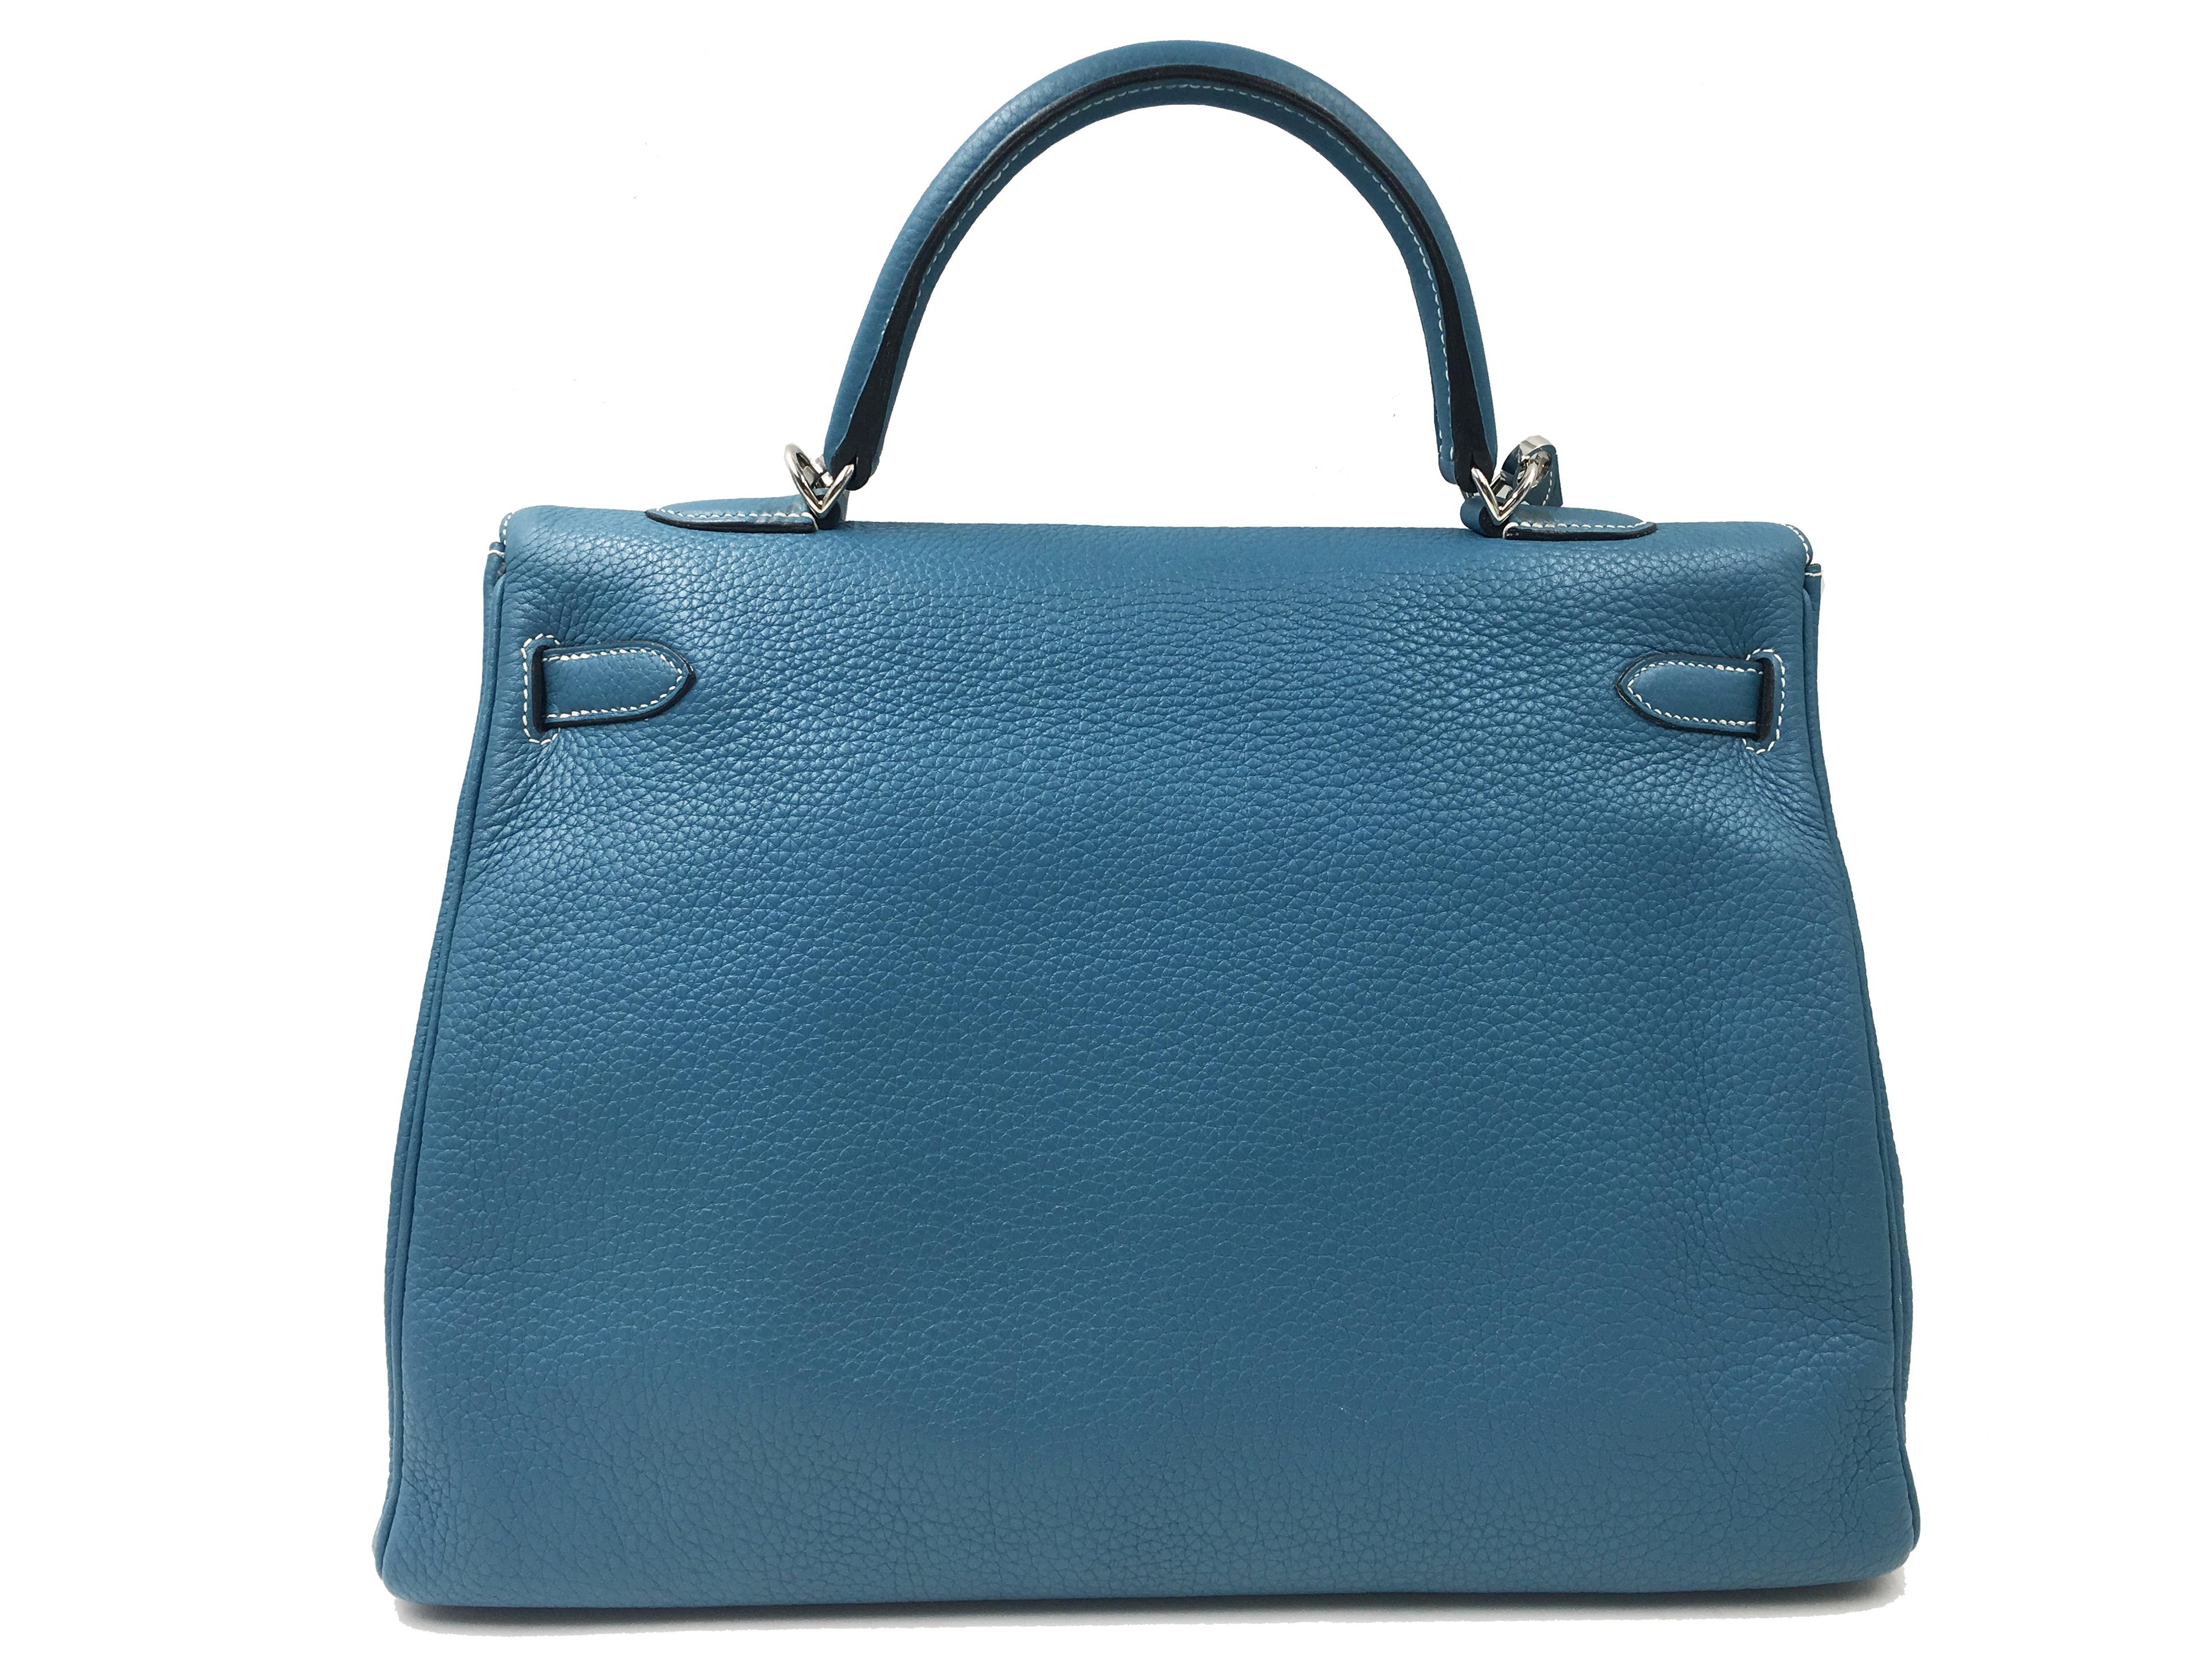 The Kelly bag 32
13.7